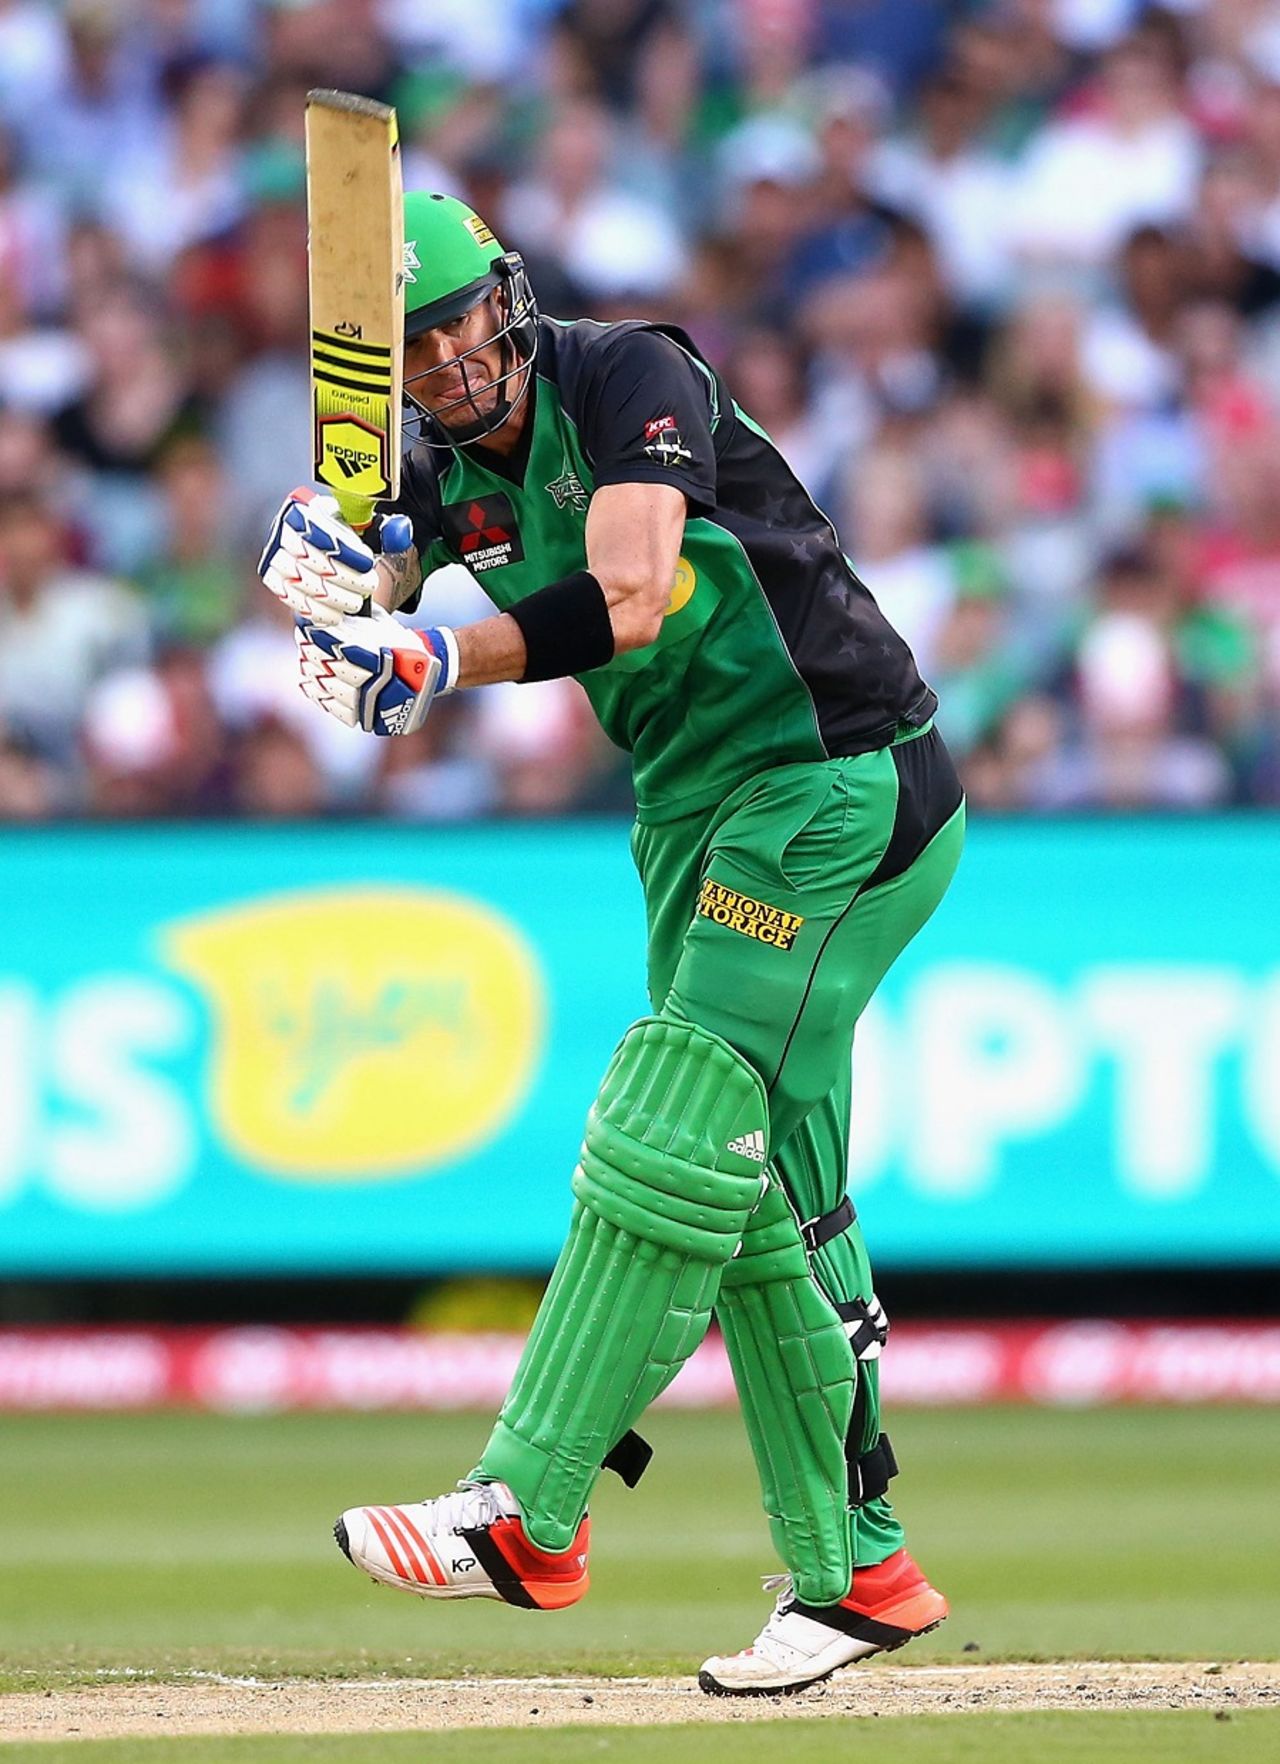 Kevin Pietersen flicked his first ball for four, Melbourne Stars v Sydney Thunder, BBL final 2015-16, Melbourne, January 24, 2016